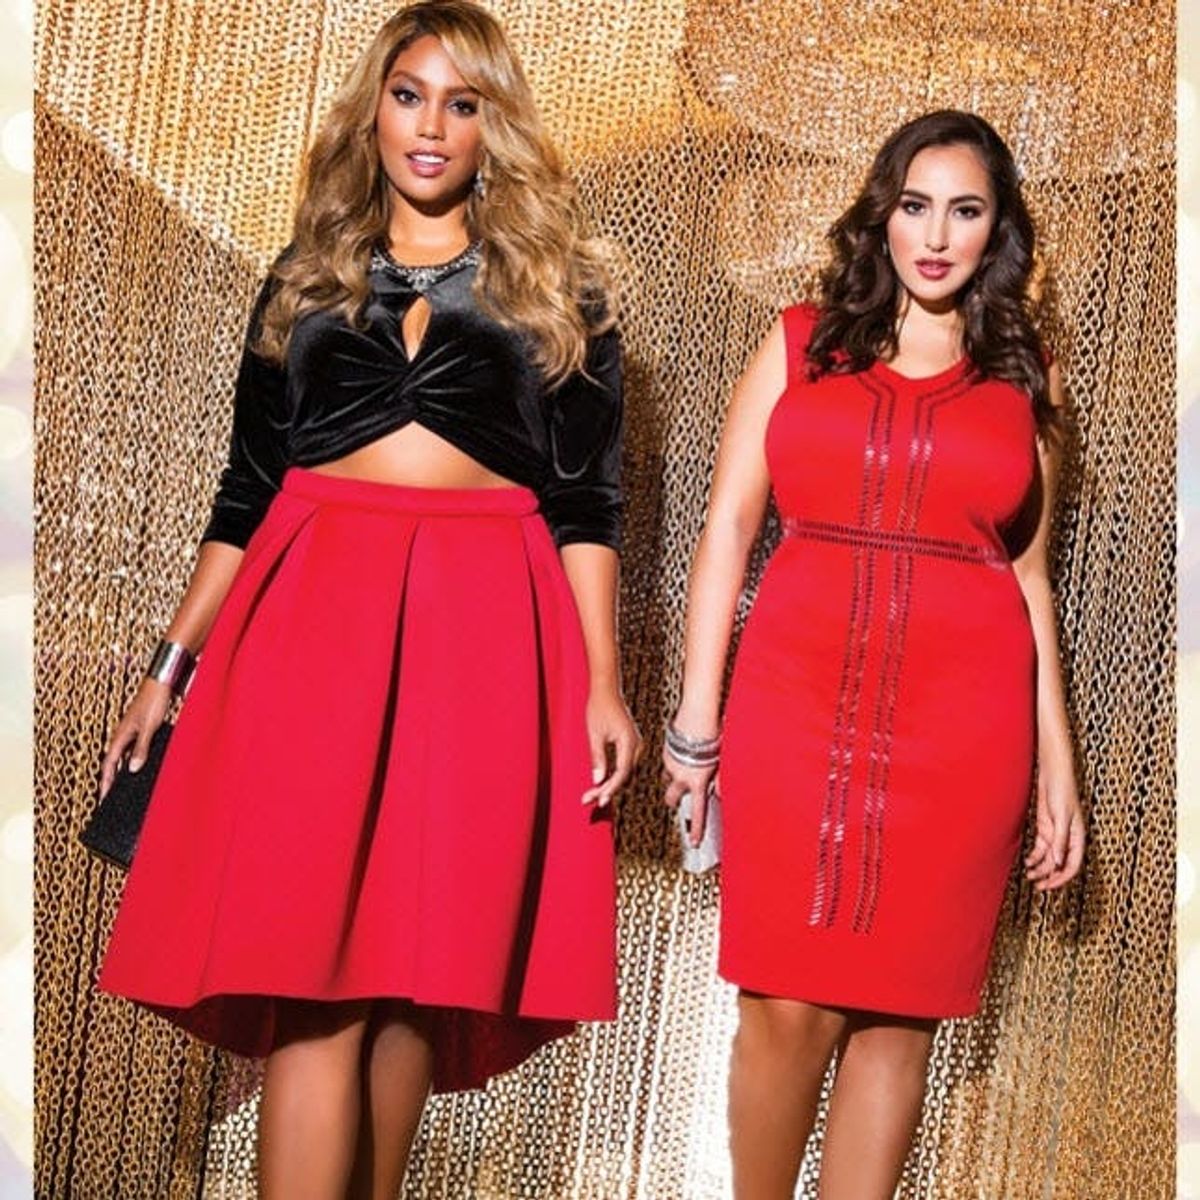 This Plus-Size Fashion Line Has the Hottest Holiday Dresses